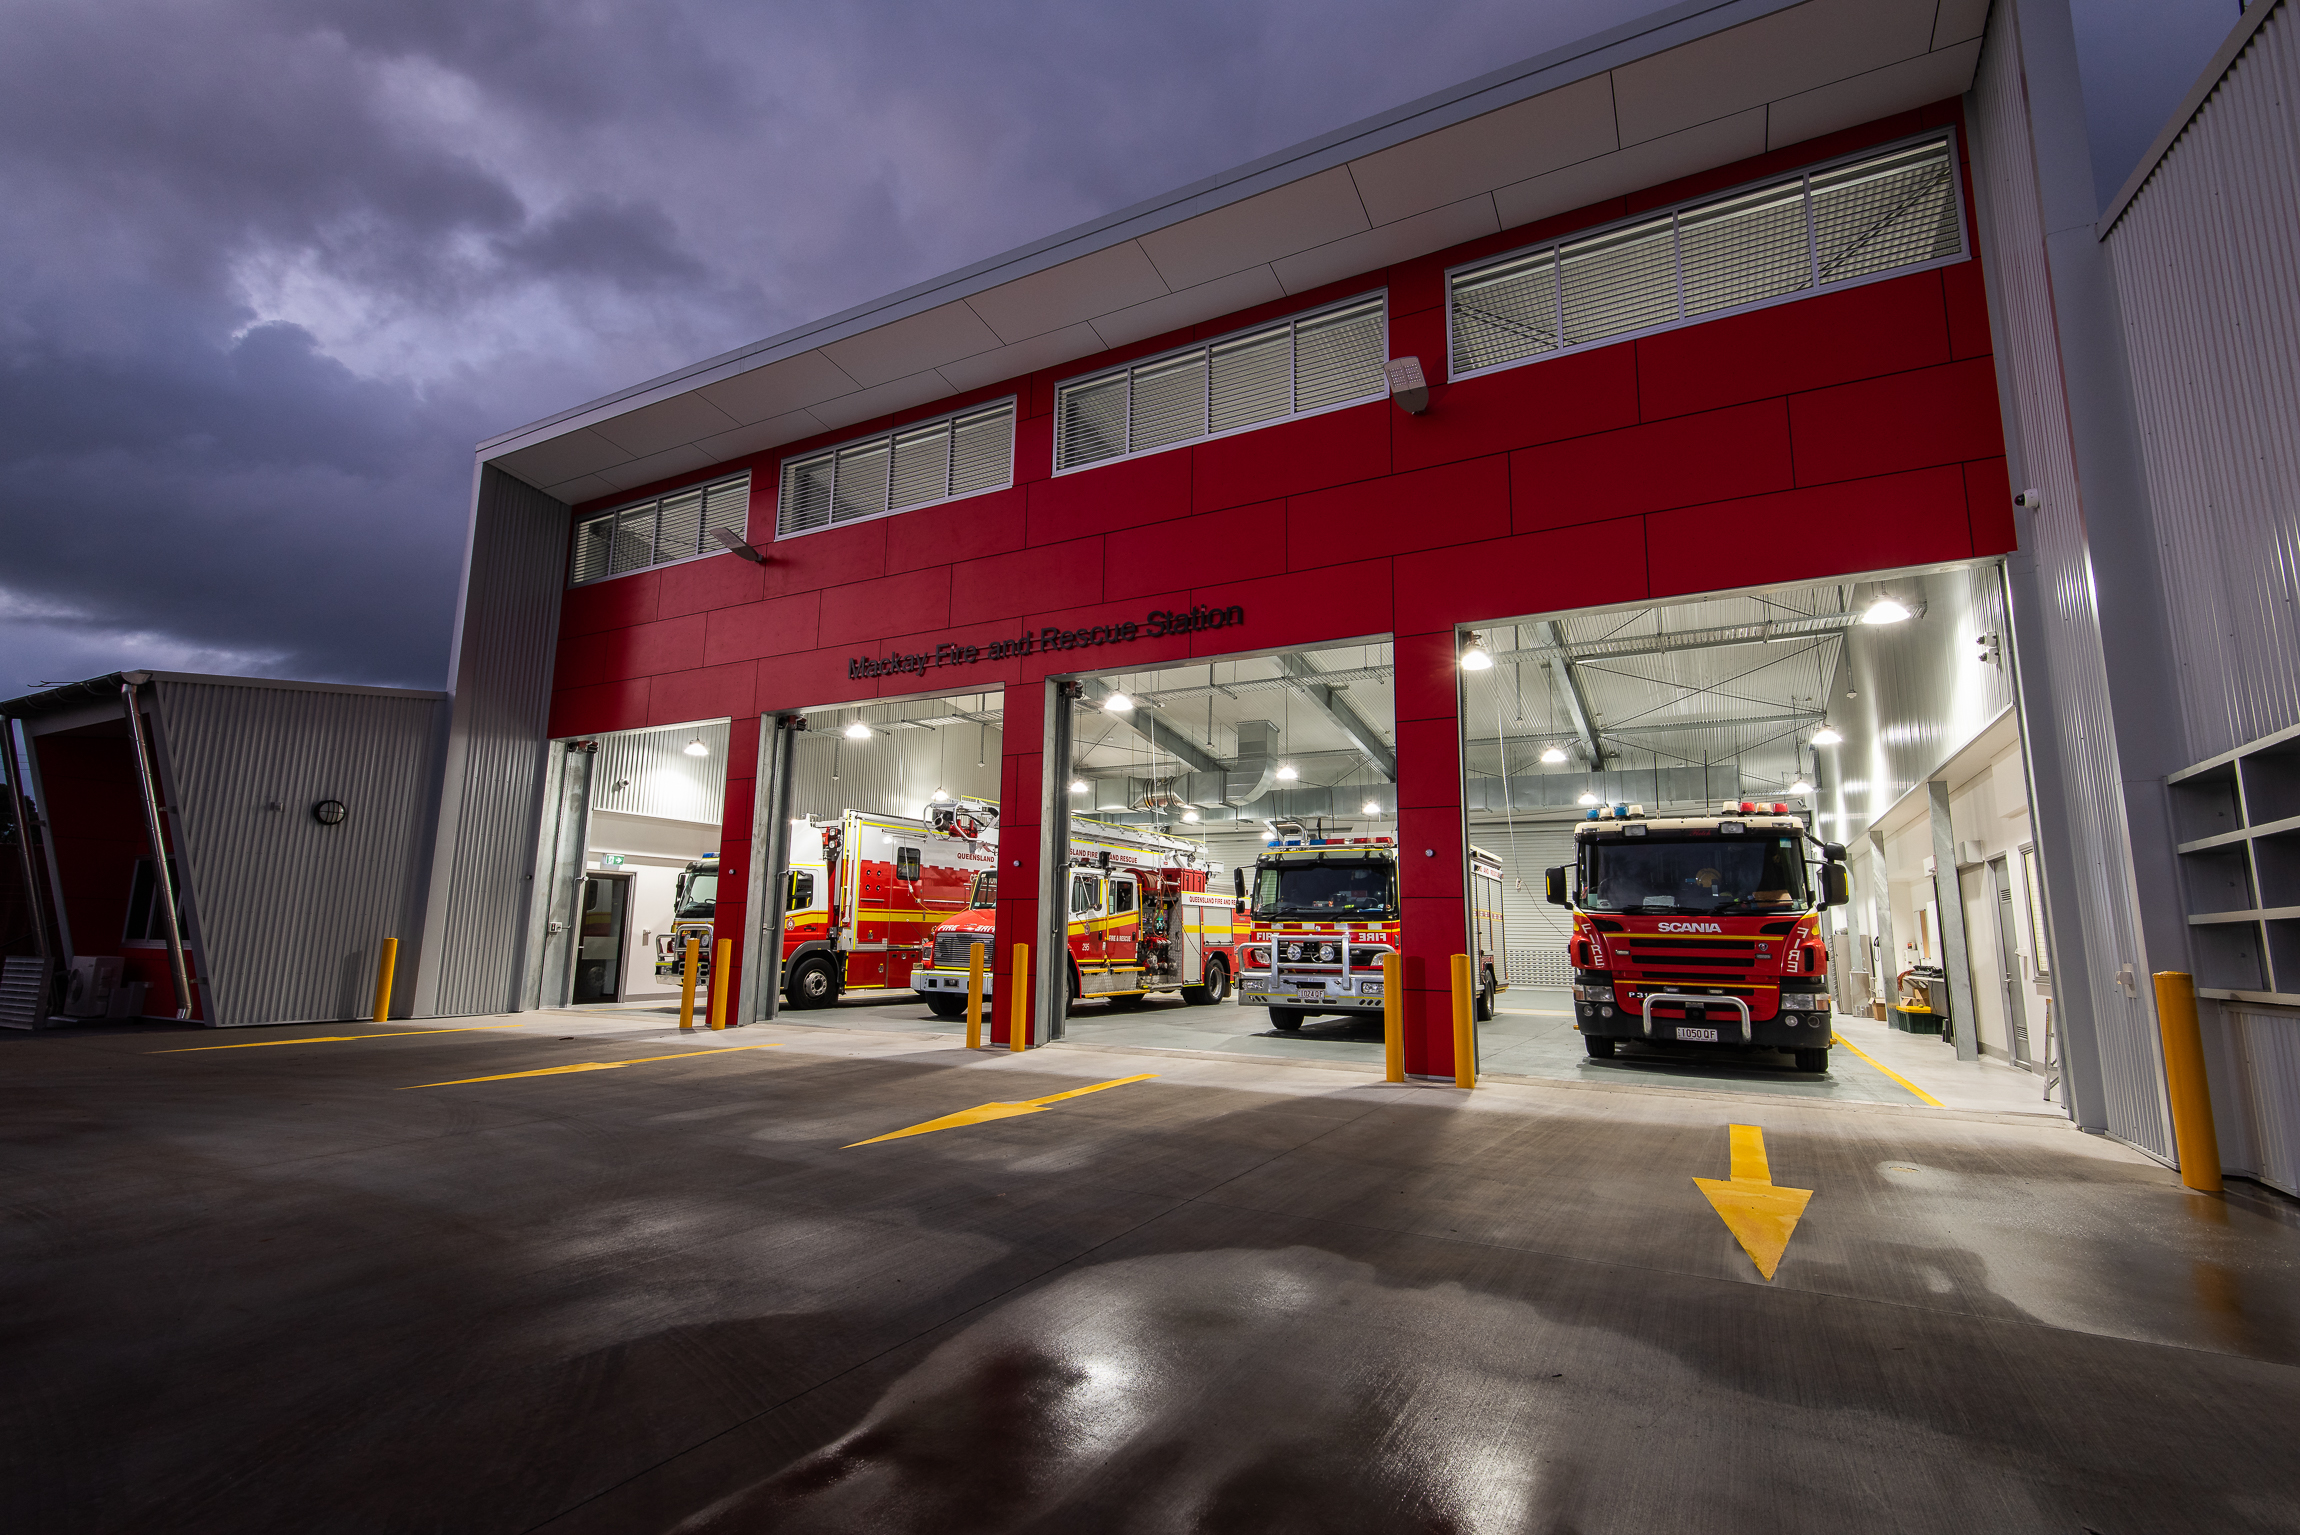 Mky_Fire_Station_005_BDB_5490_Low_Res.jpg